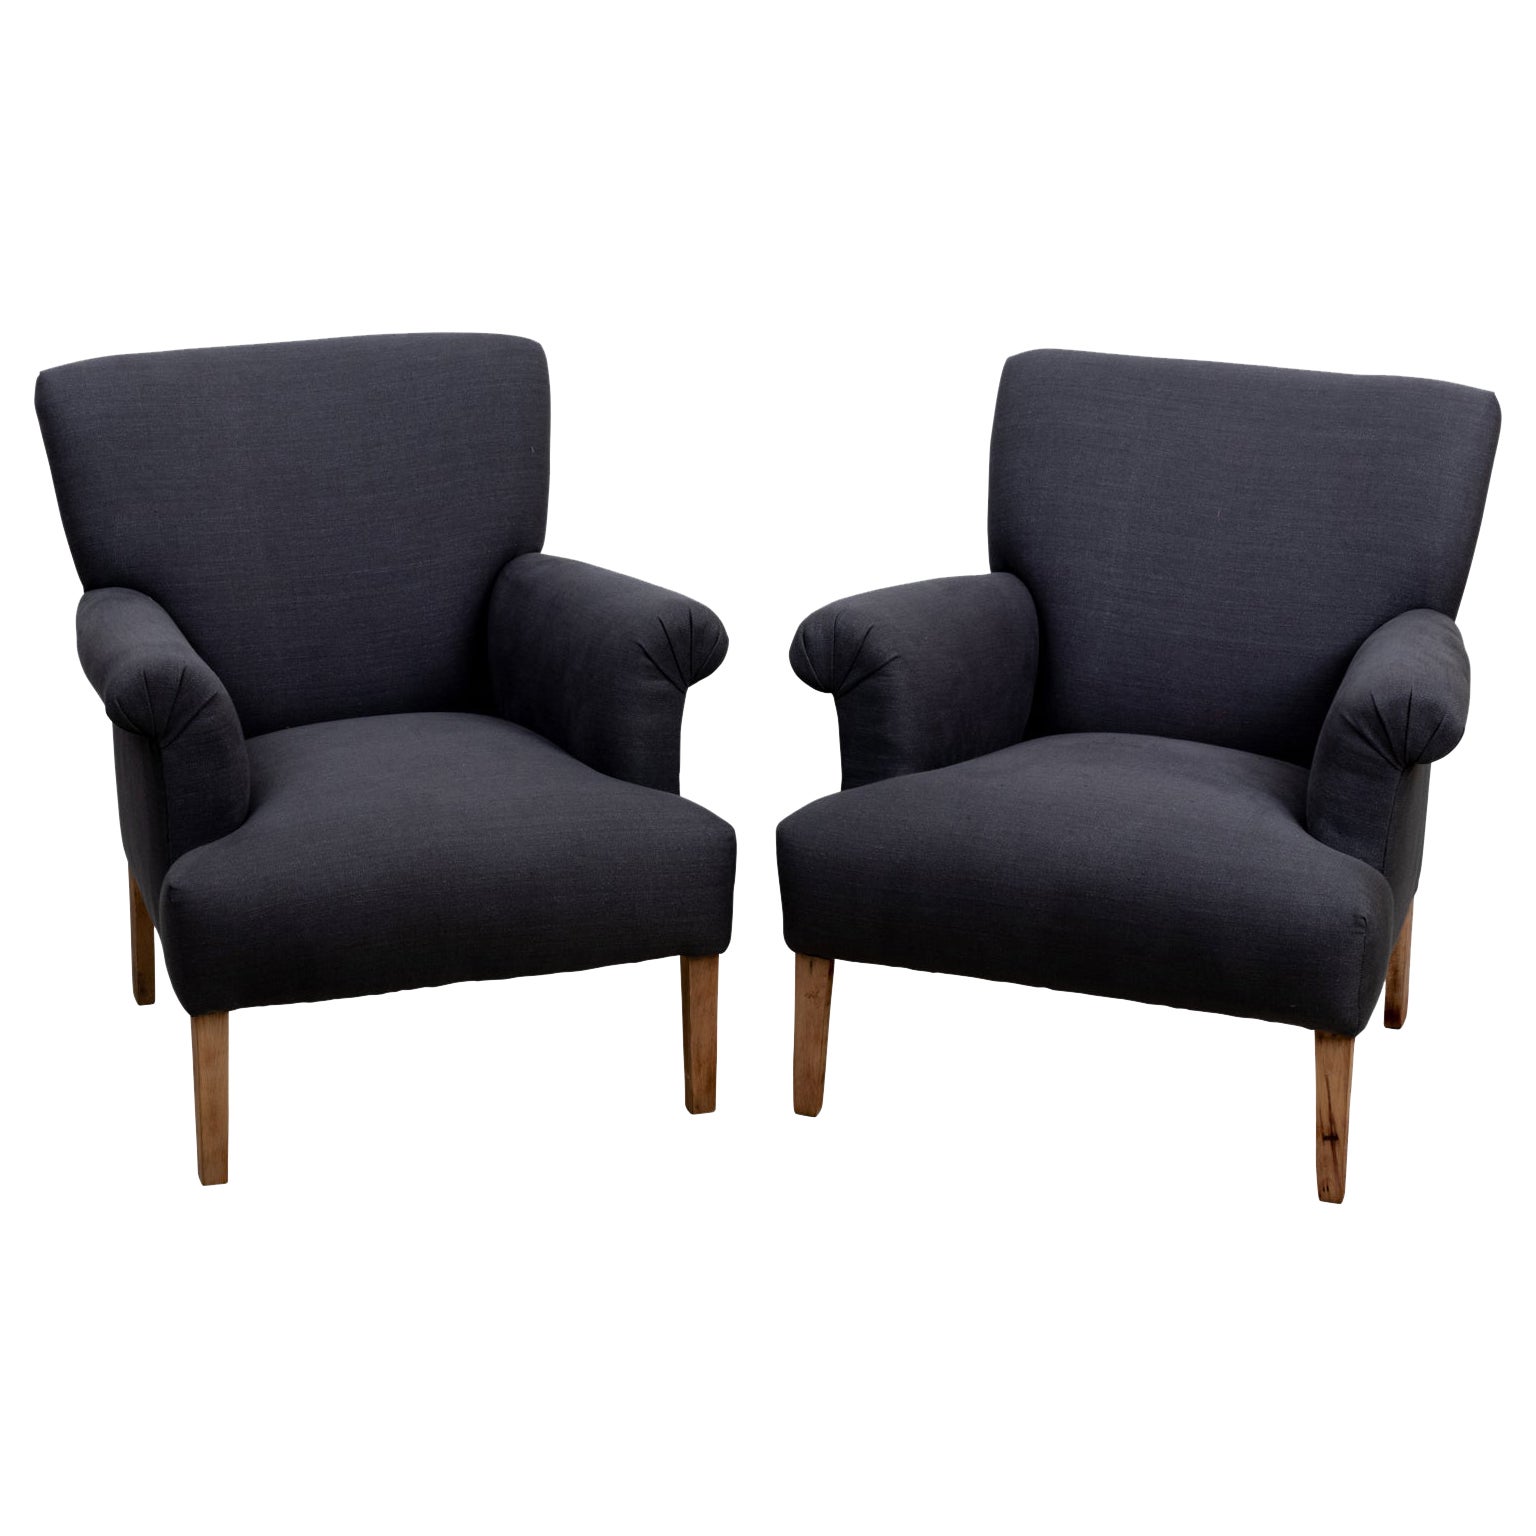 Pair of Armchairs in Charcoal Linen